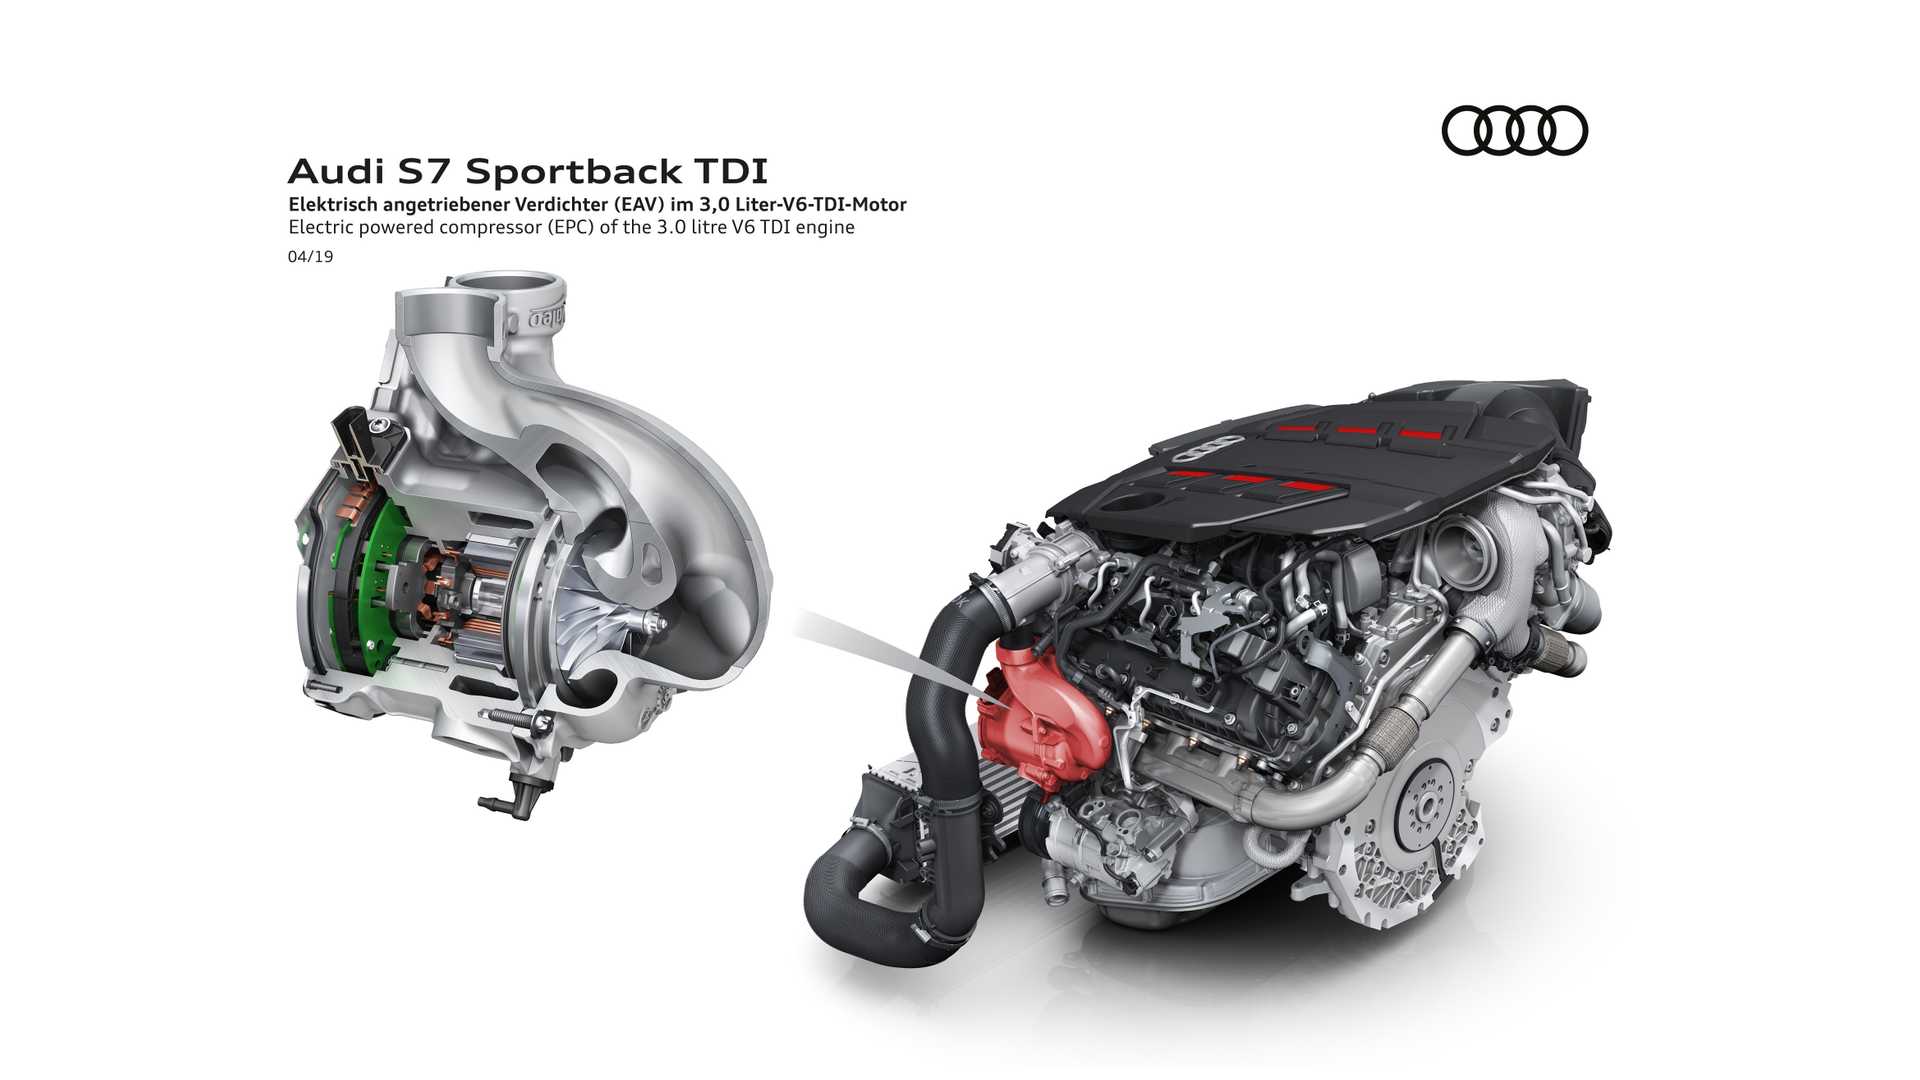 2019 Audi S7 Sportback TDI Electric powered compressor (EPC) Wallpapers #20 of 23